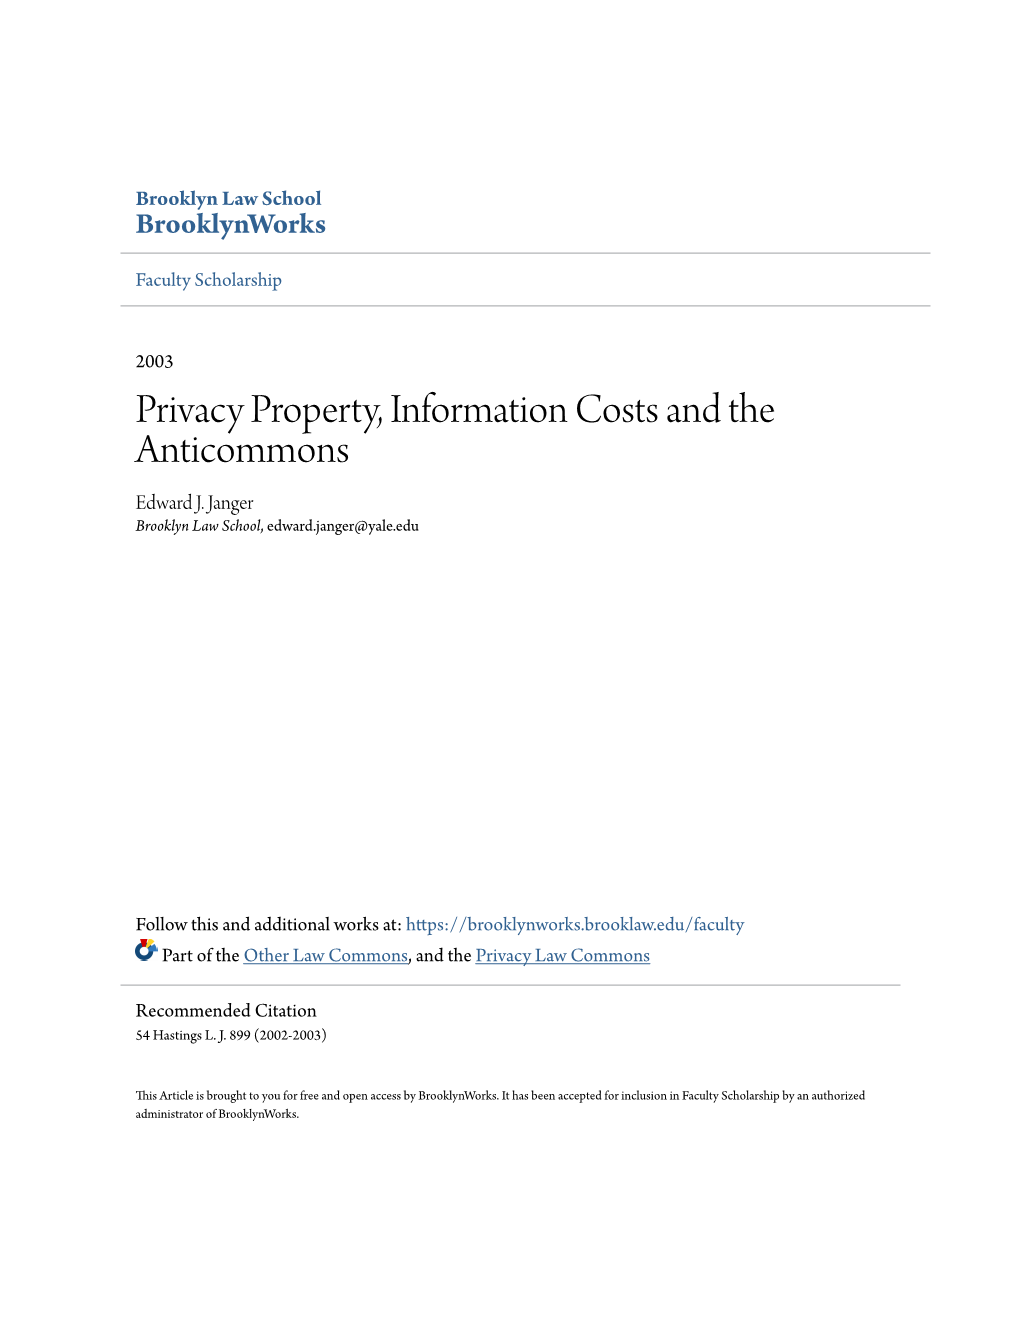 Privacy Property, Information Costs and the Anticommons Edward J